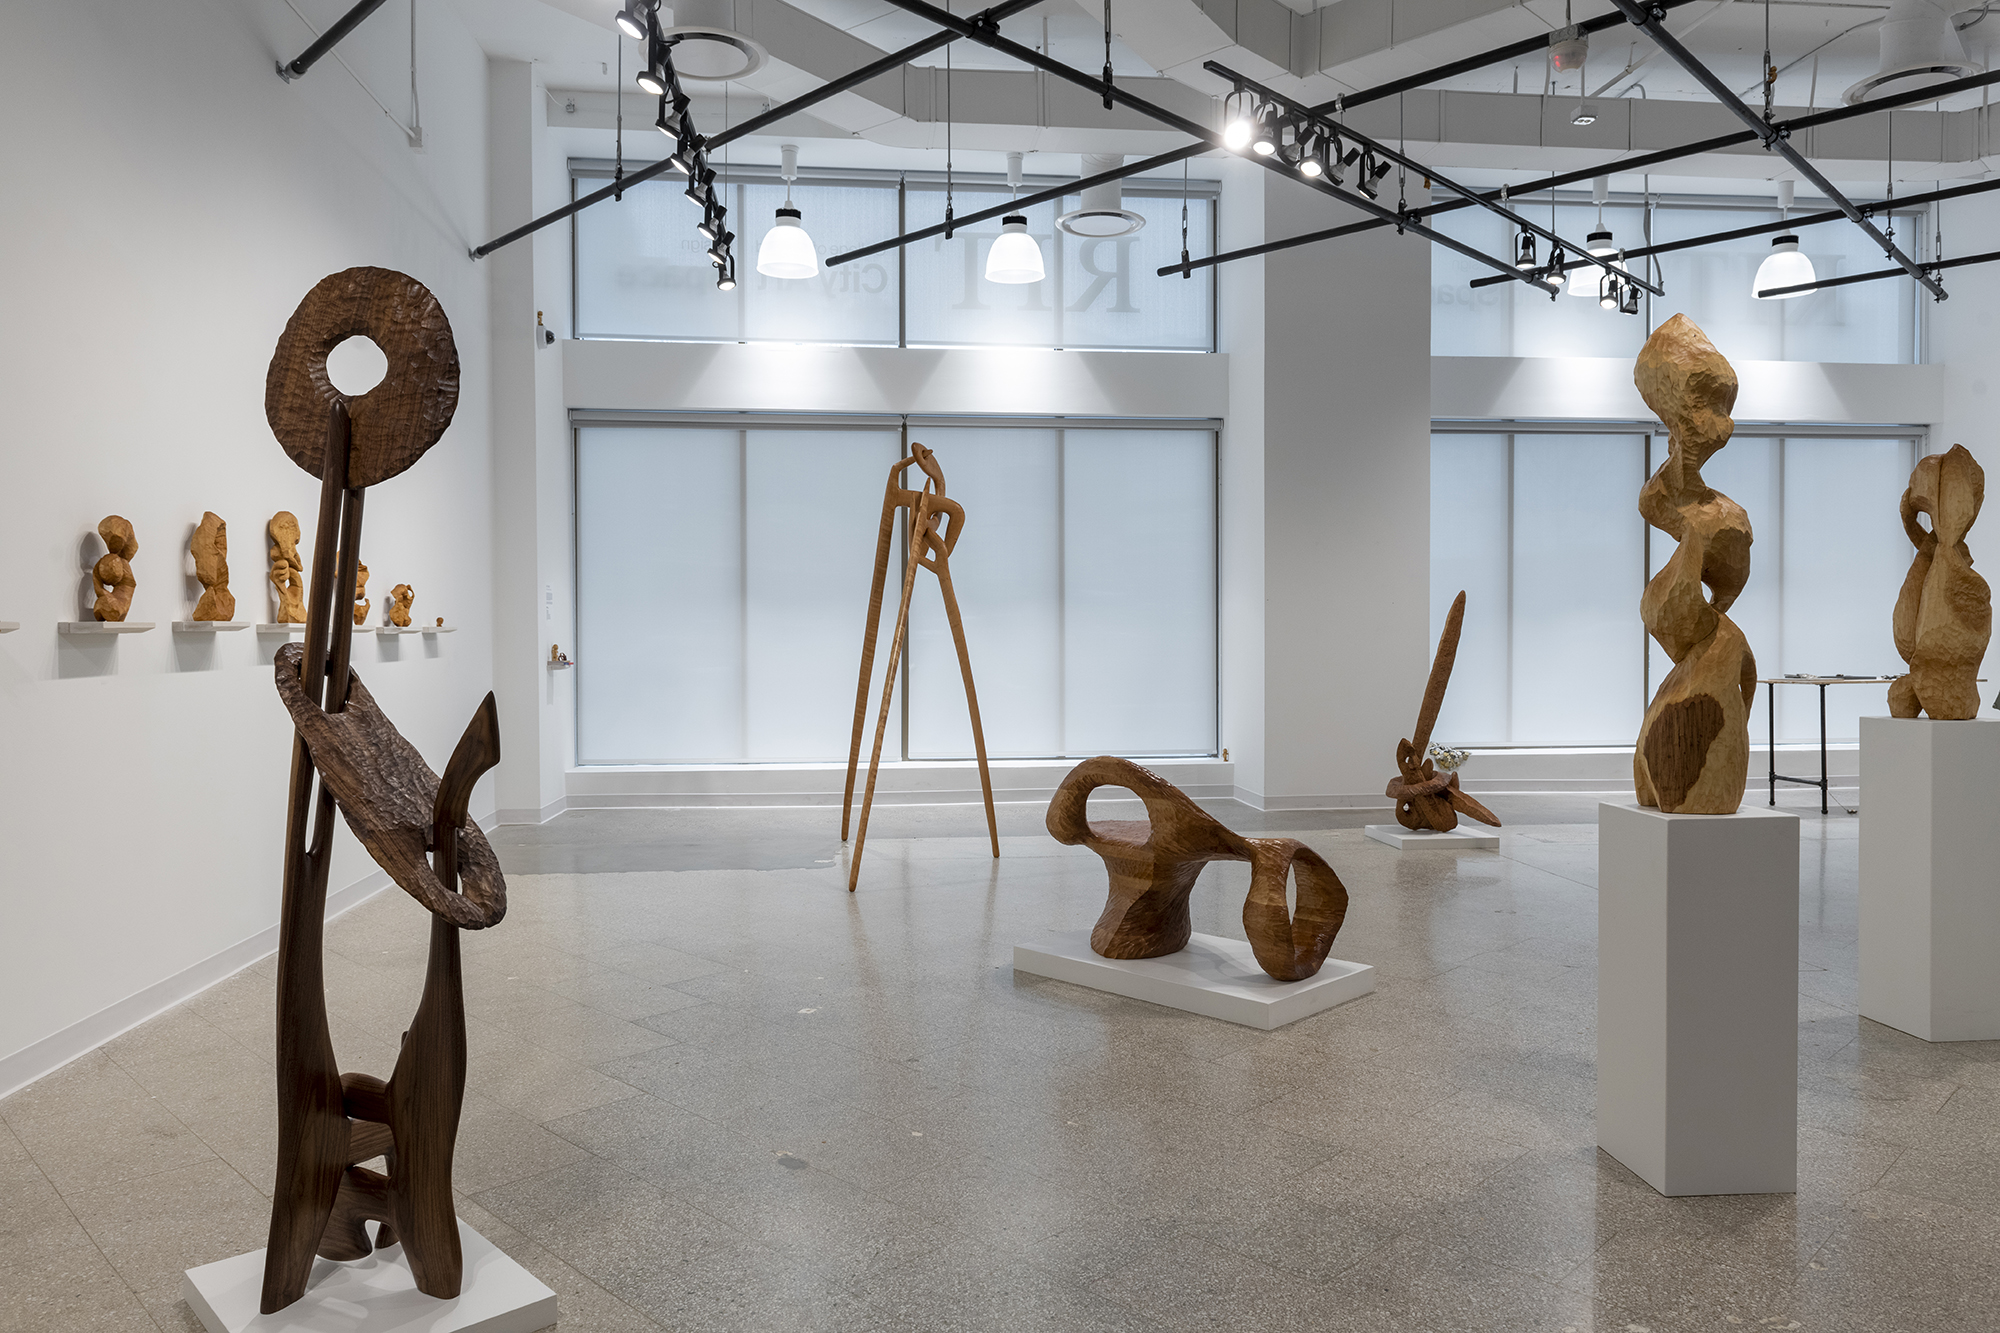 A gallery display of wooden sculptures.